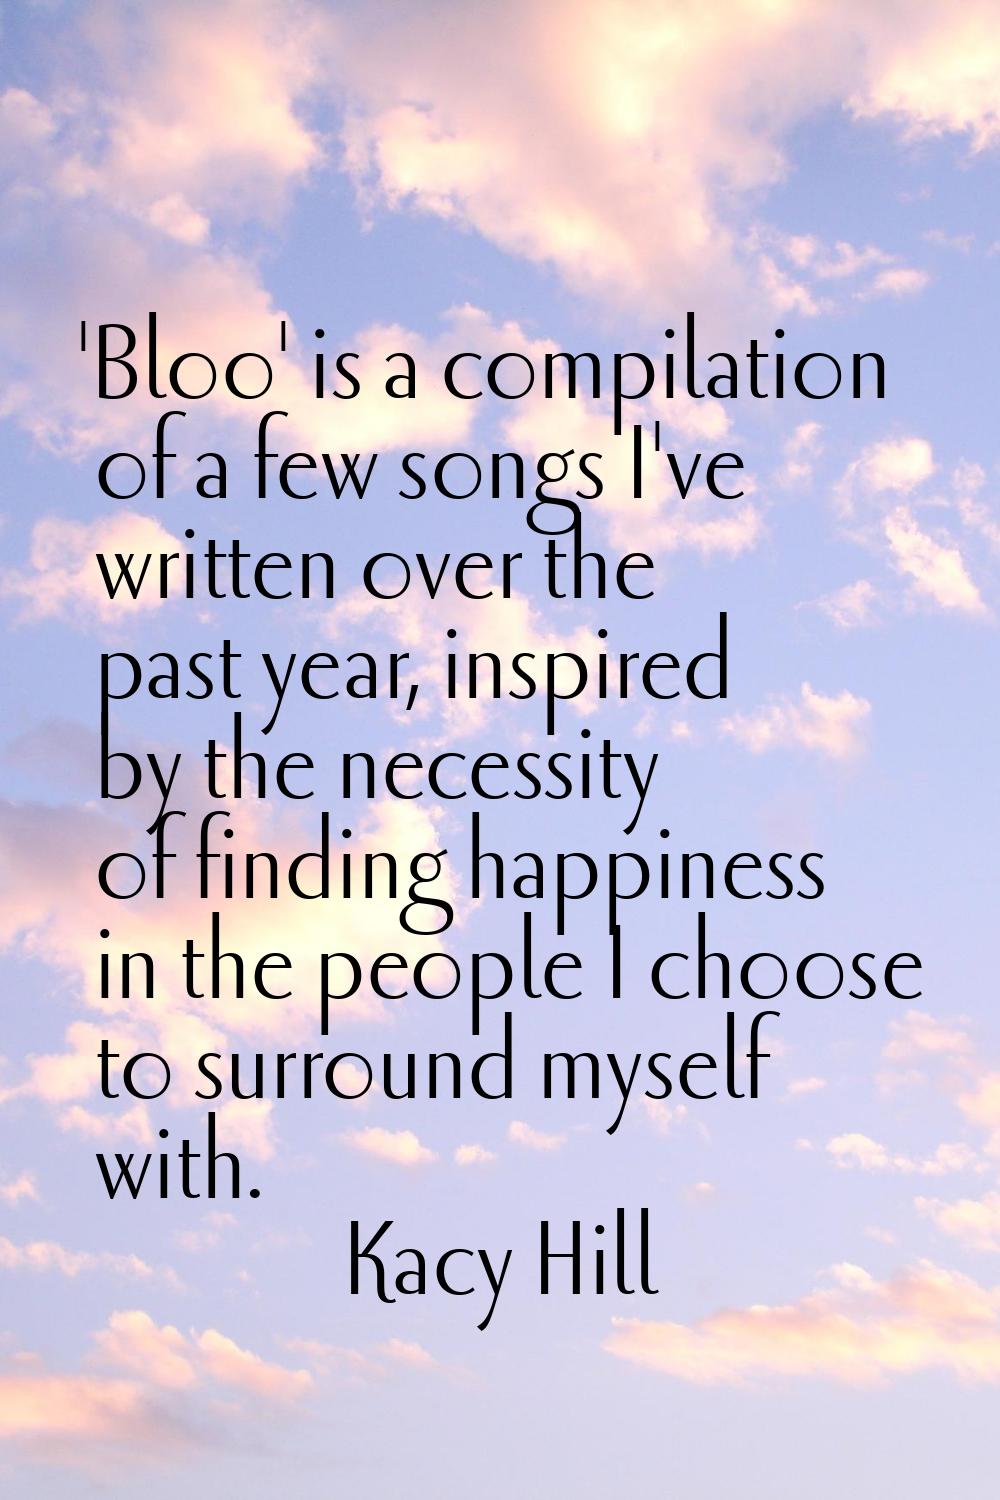 'Bloo' is a compilation of a few songs I've written over the past year, inspired by the necessity o